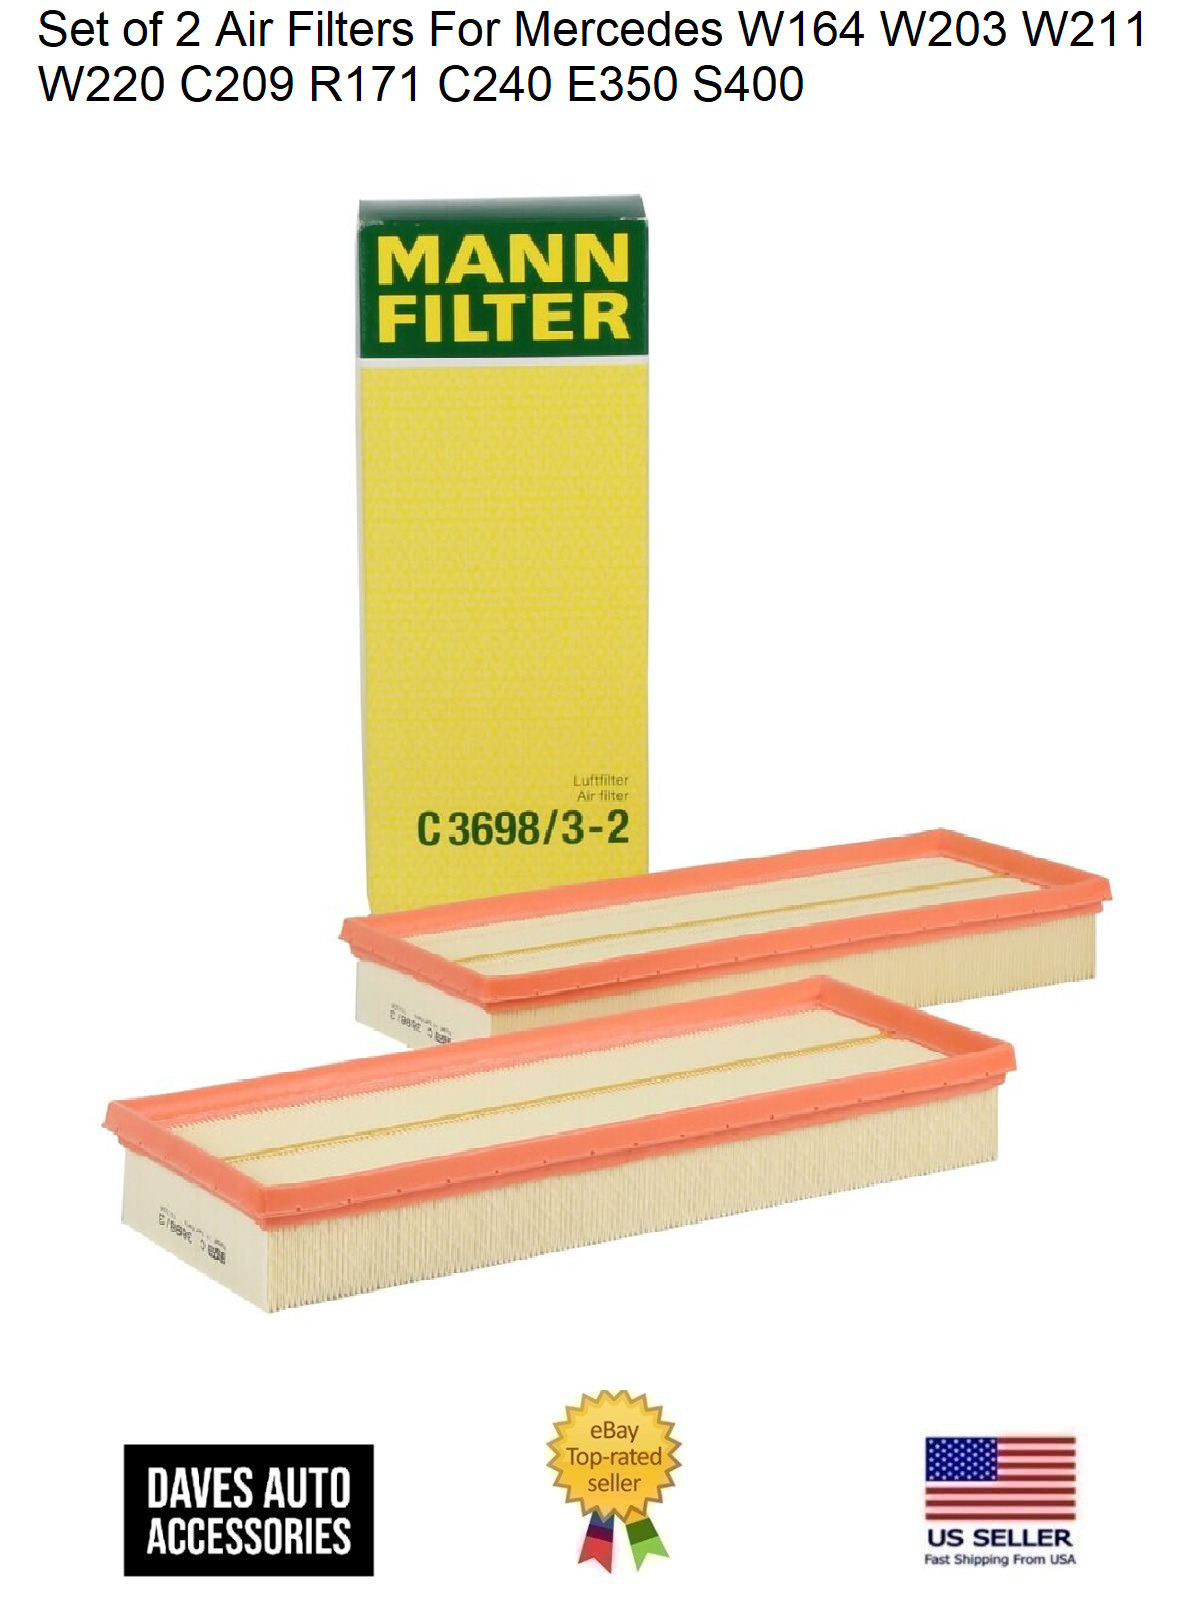 MANN Engine Air Filter Set Contains two filters #C369832 For 99-15 Mercedes-Benz